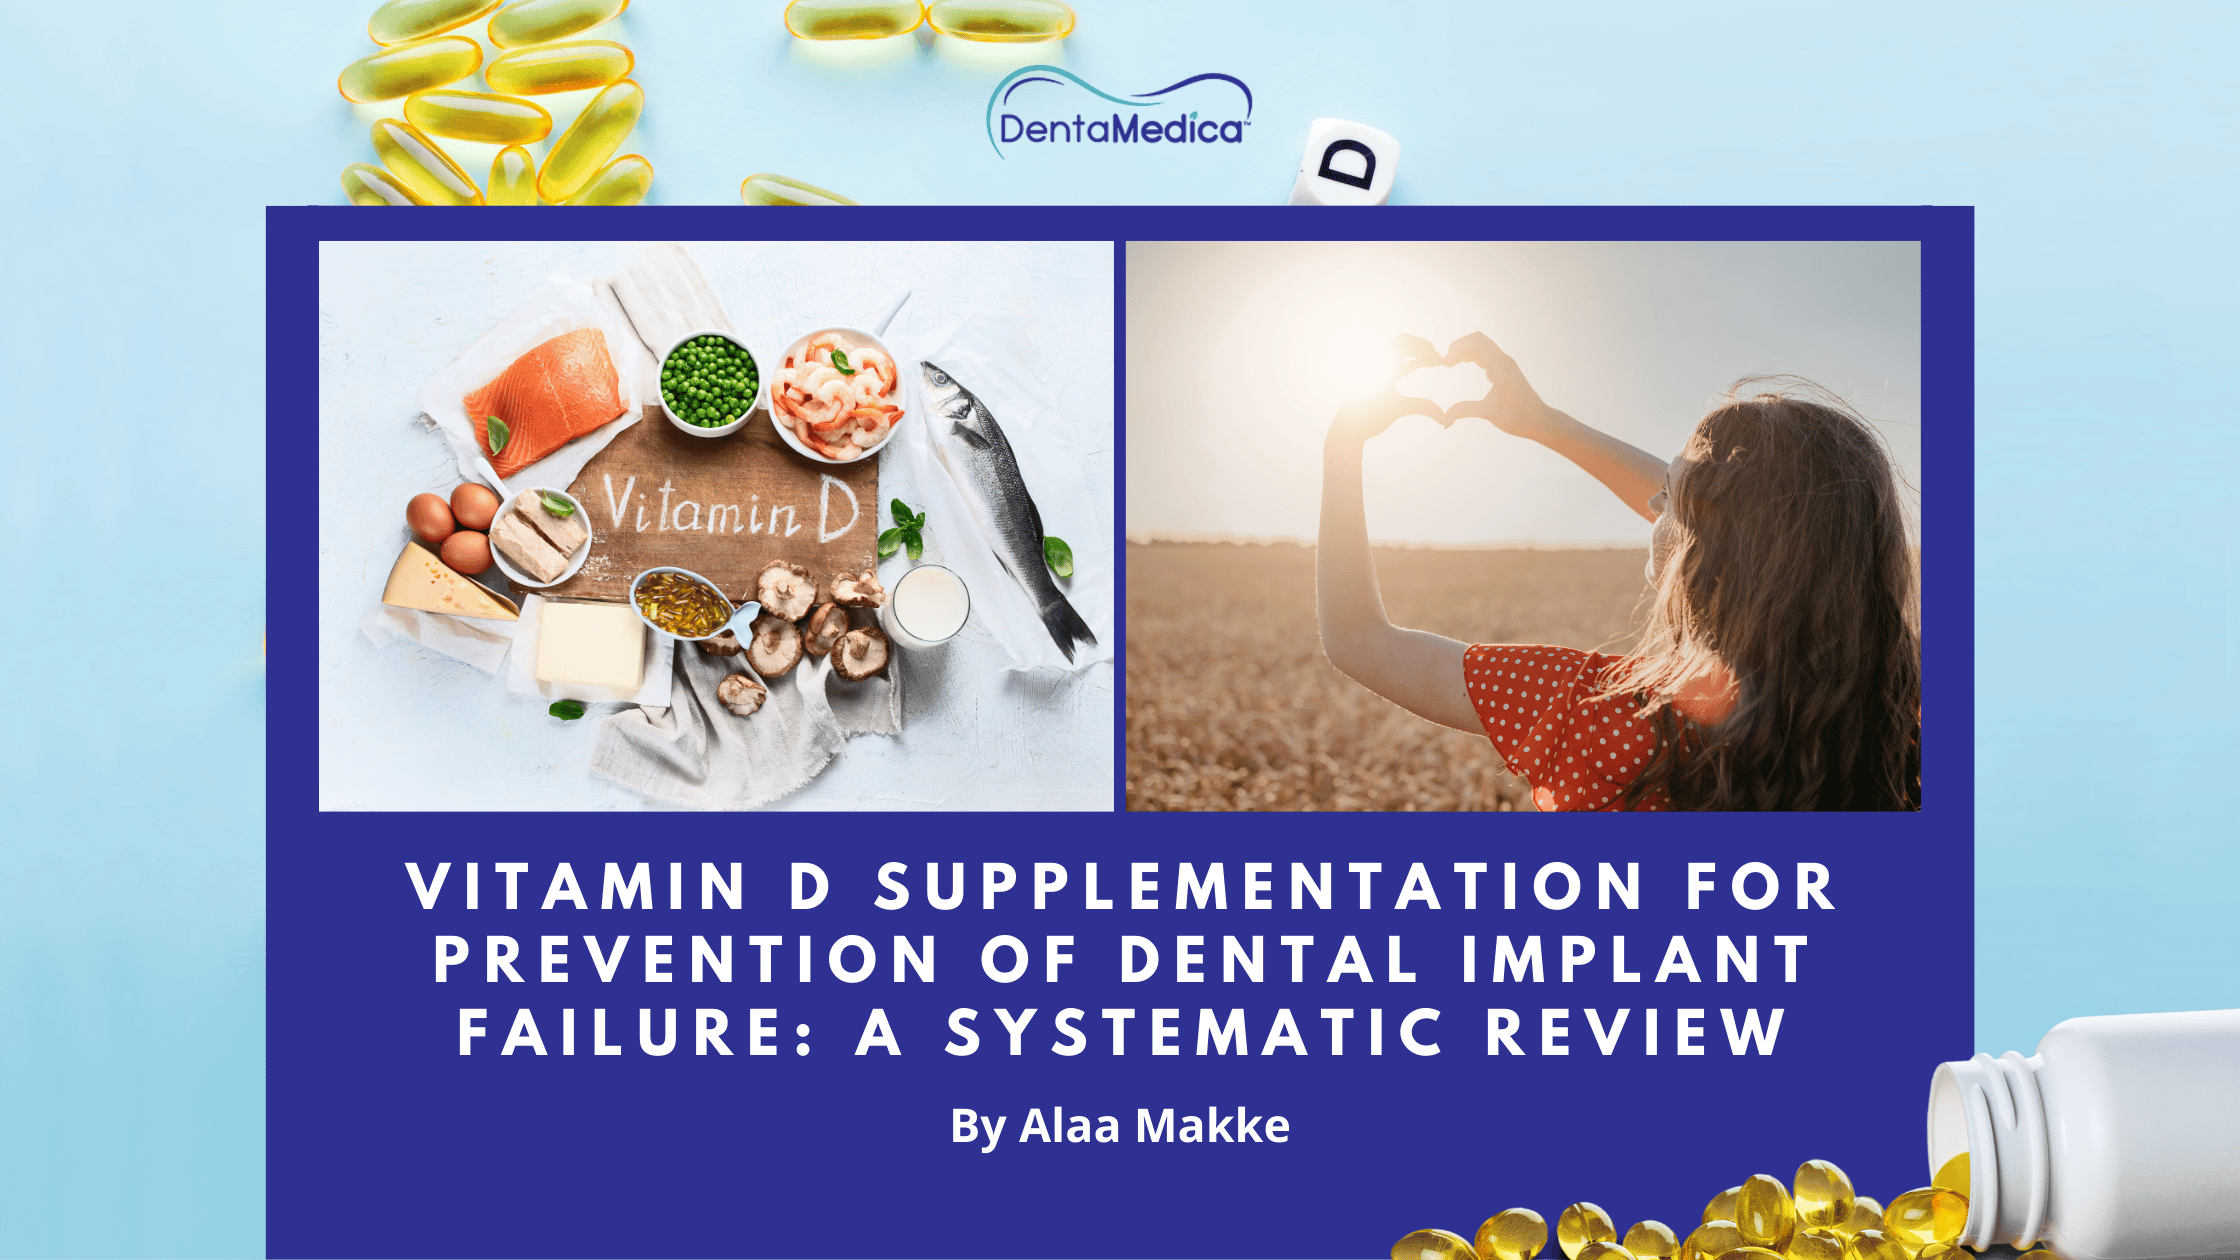 Vitamin D Supplementation for Prevention of Dental Implant Failure: A  Systematic Review - DentaMedica